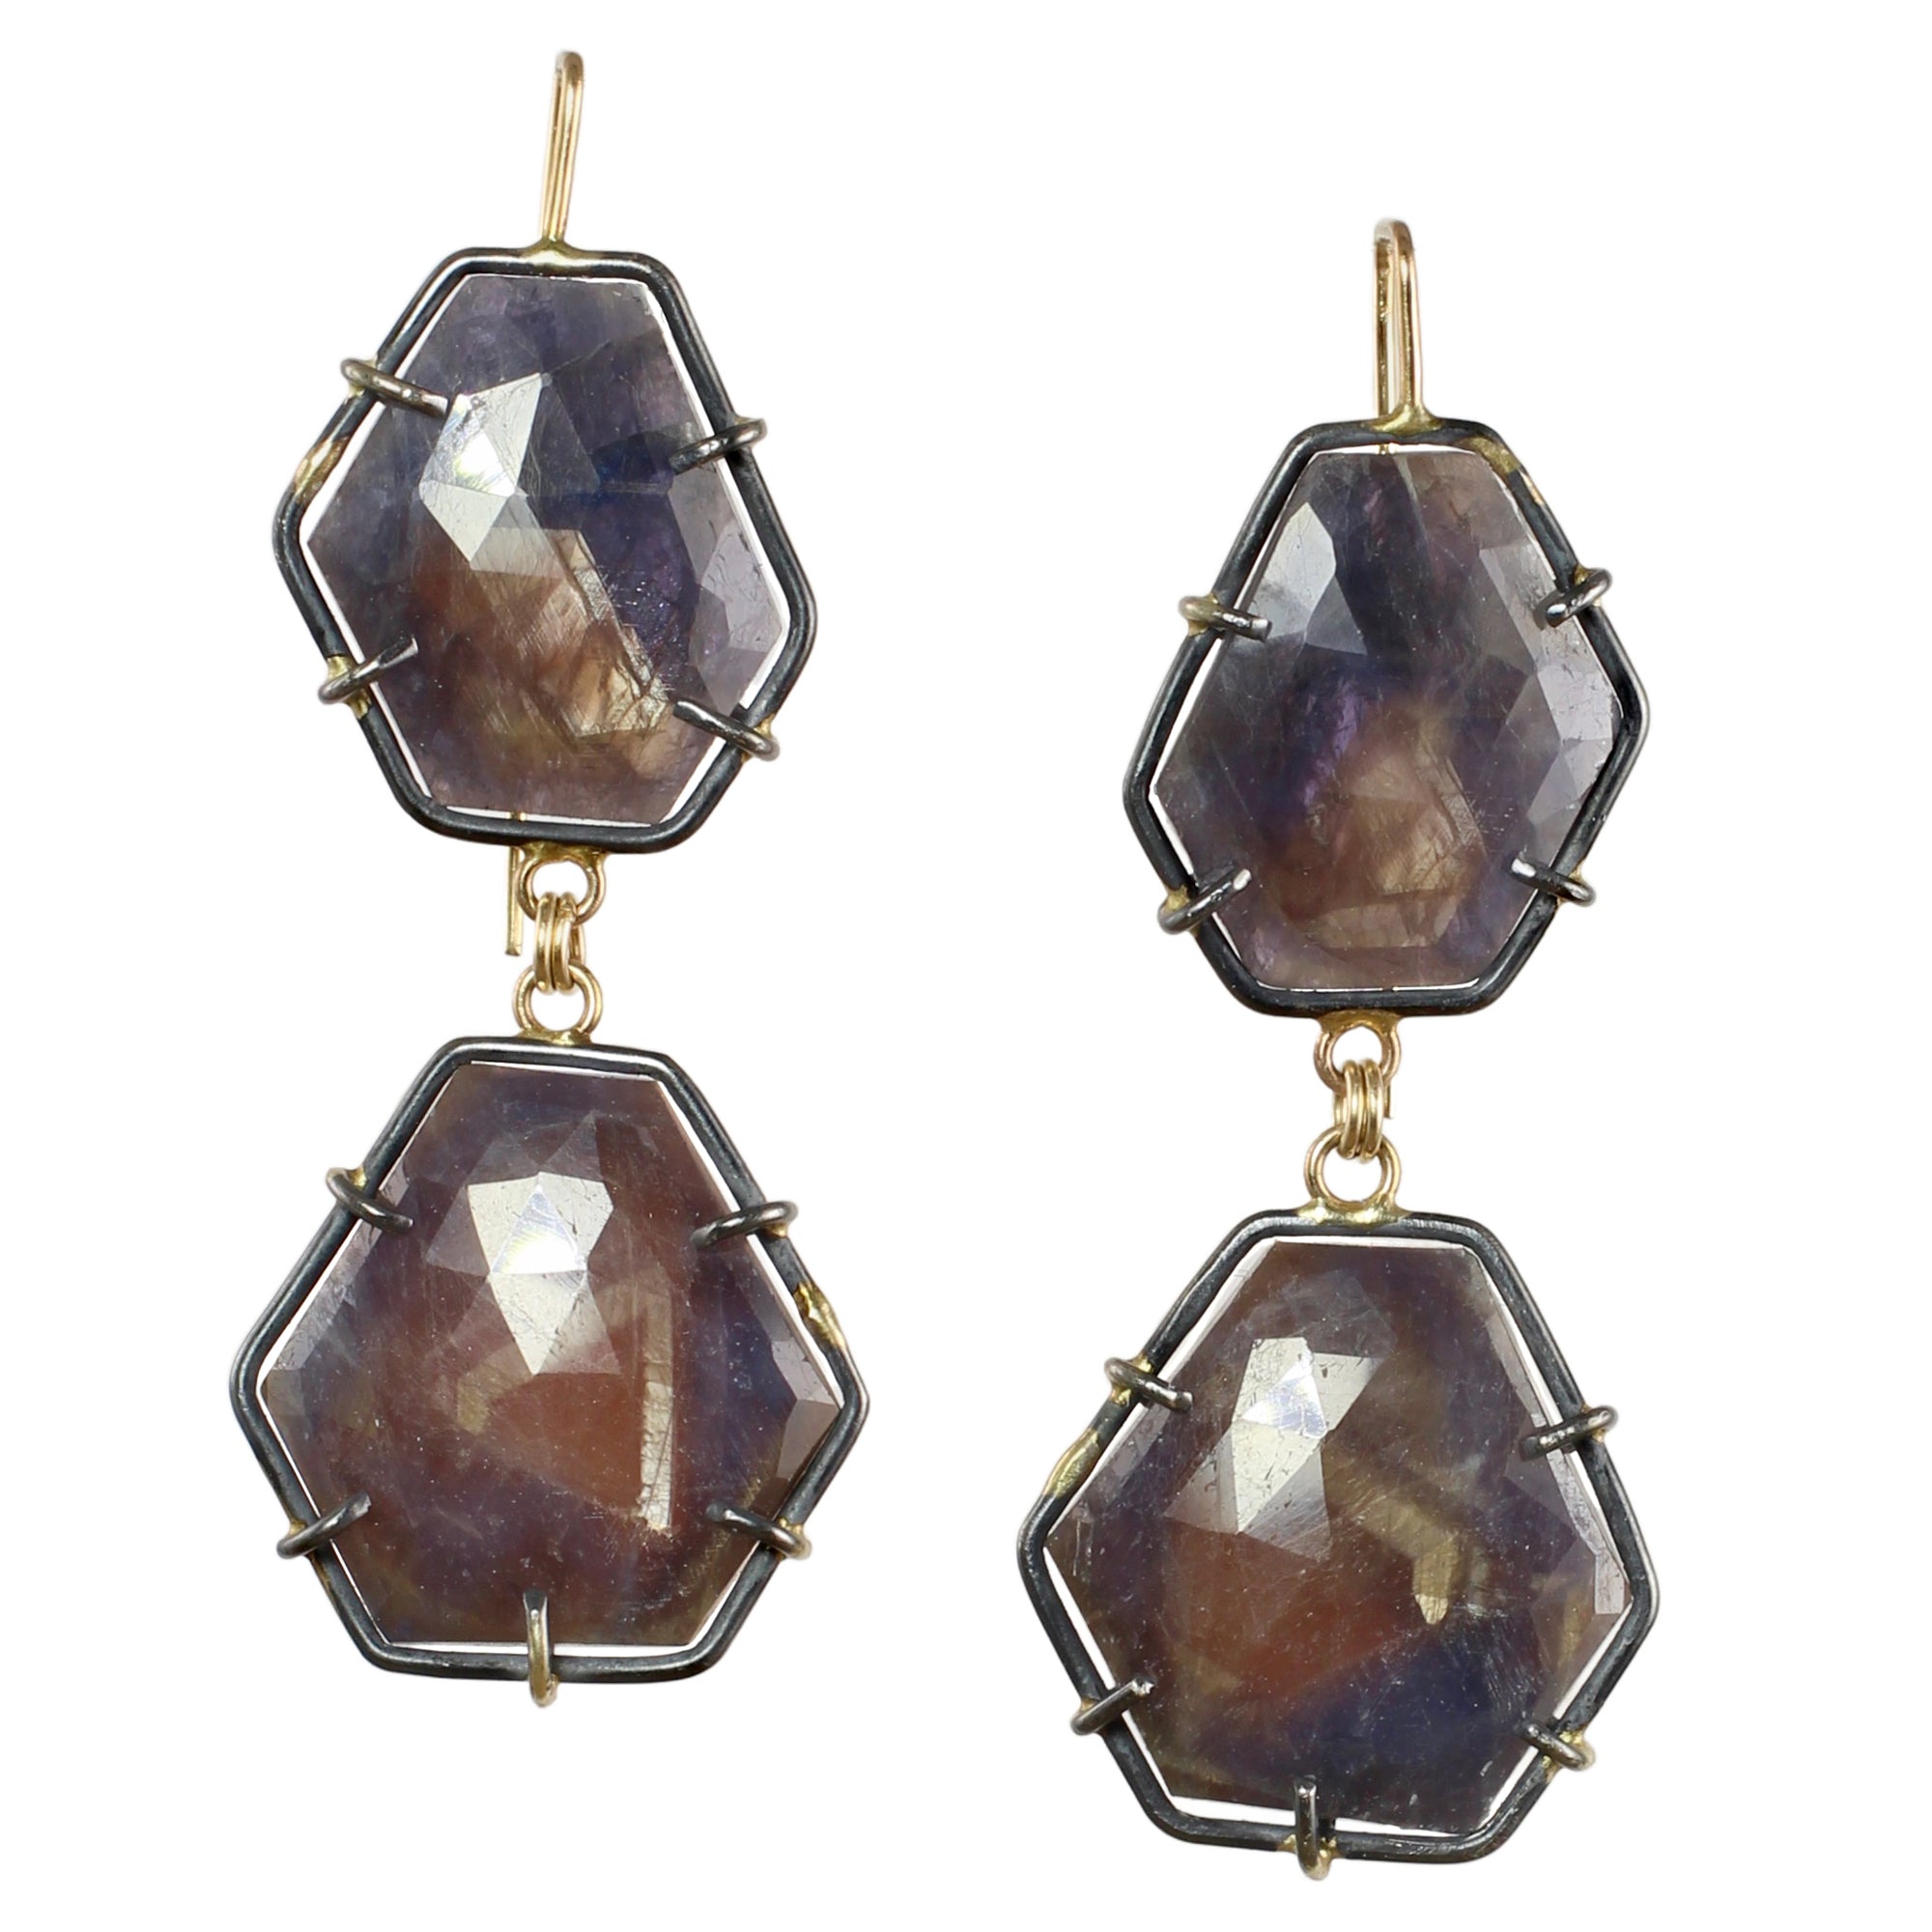 Double Sapphire Earrings with 14k Gold